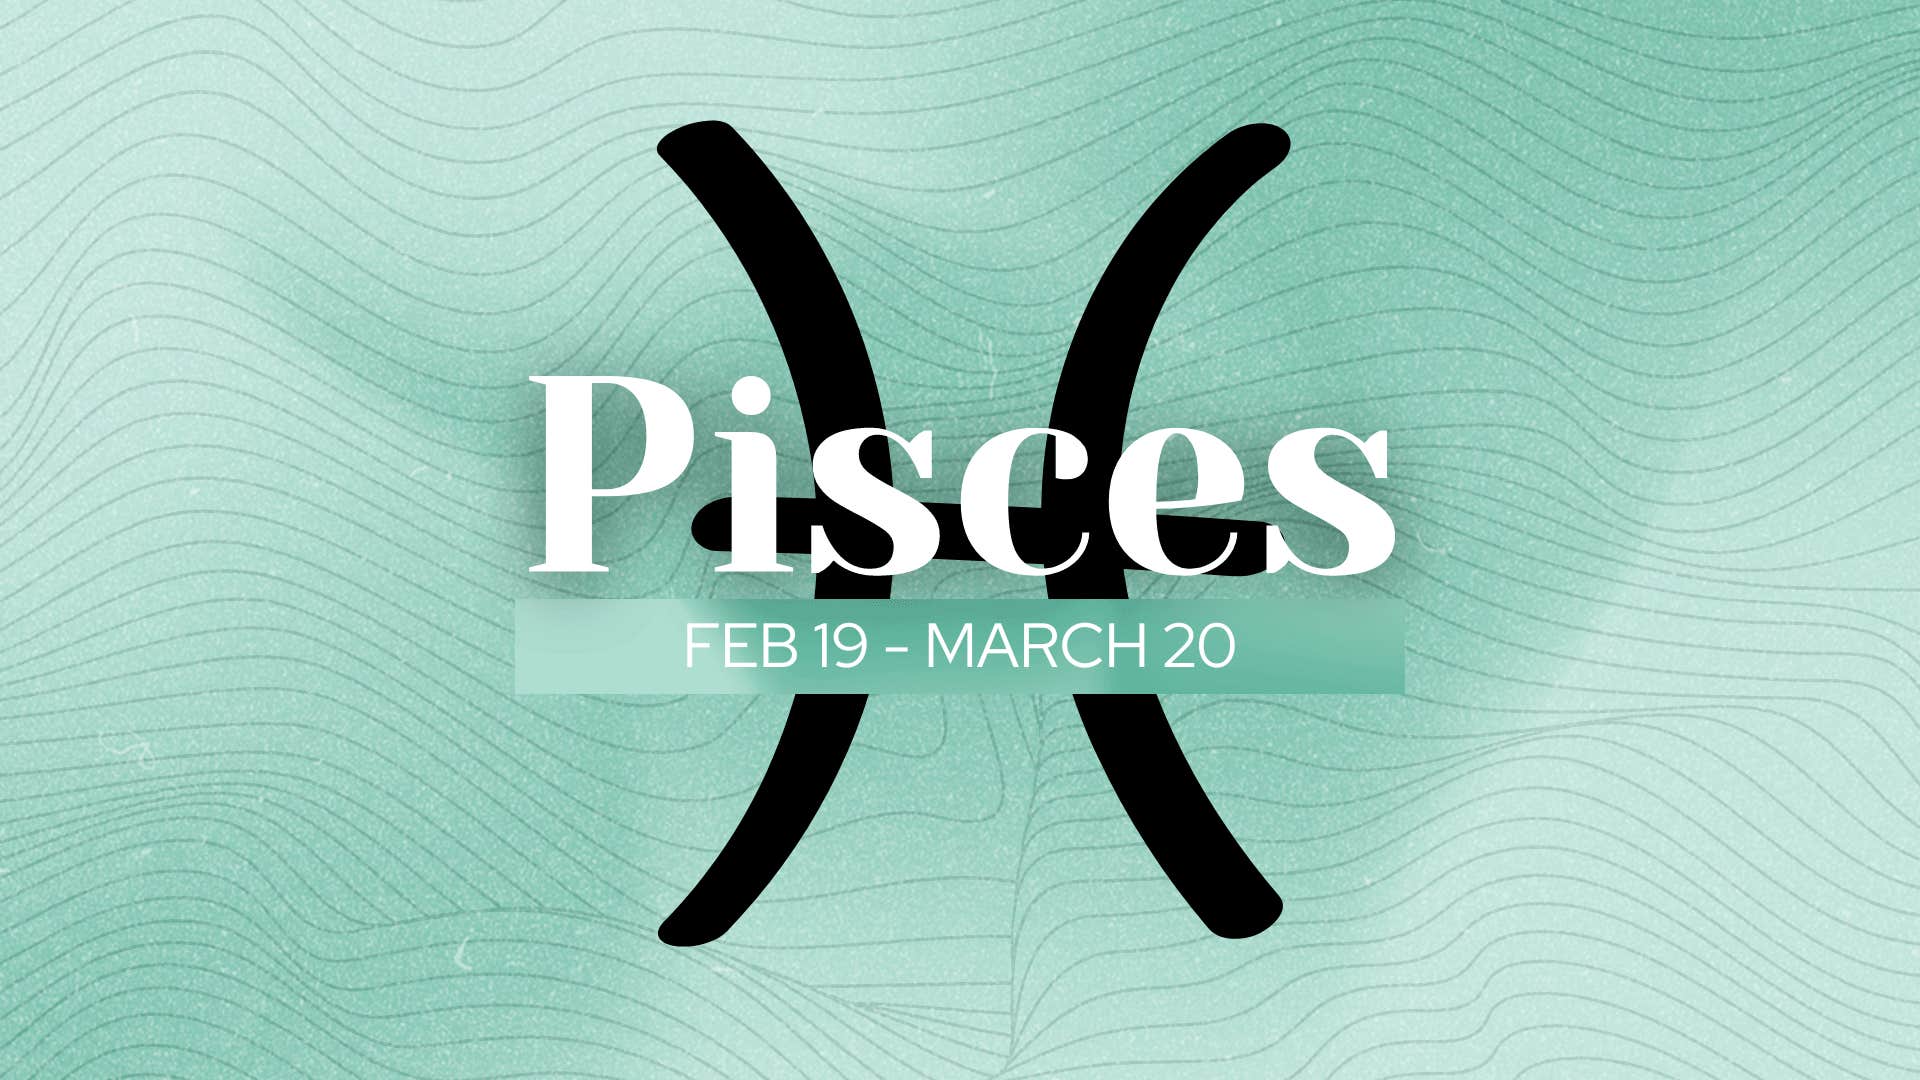 awkward relationship habits for pisces